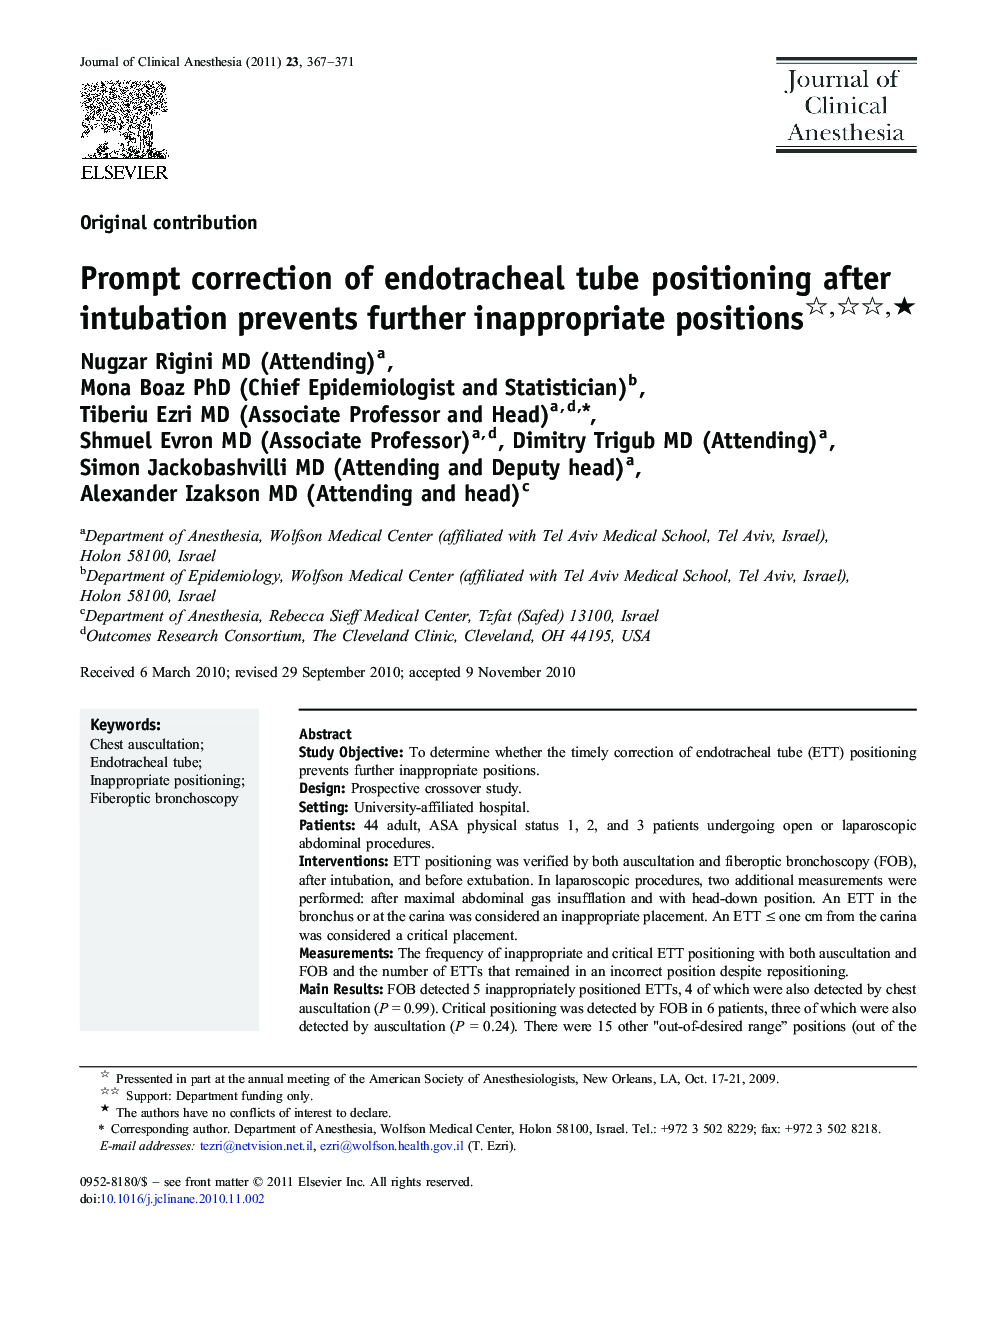 Prompt correction of endotracheal tube positioning after intubation prevents further inappropriate positions